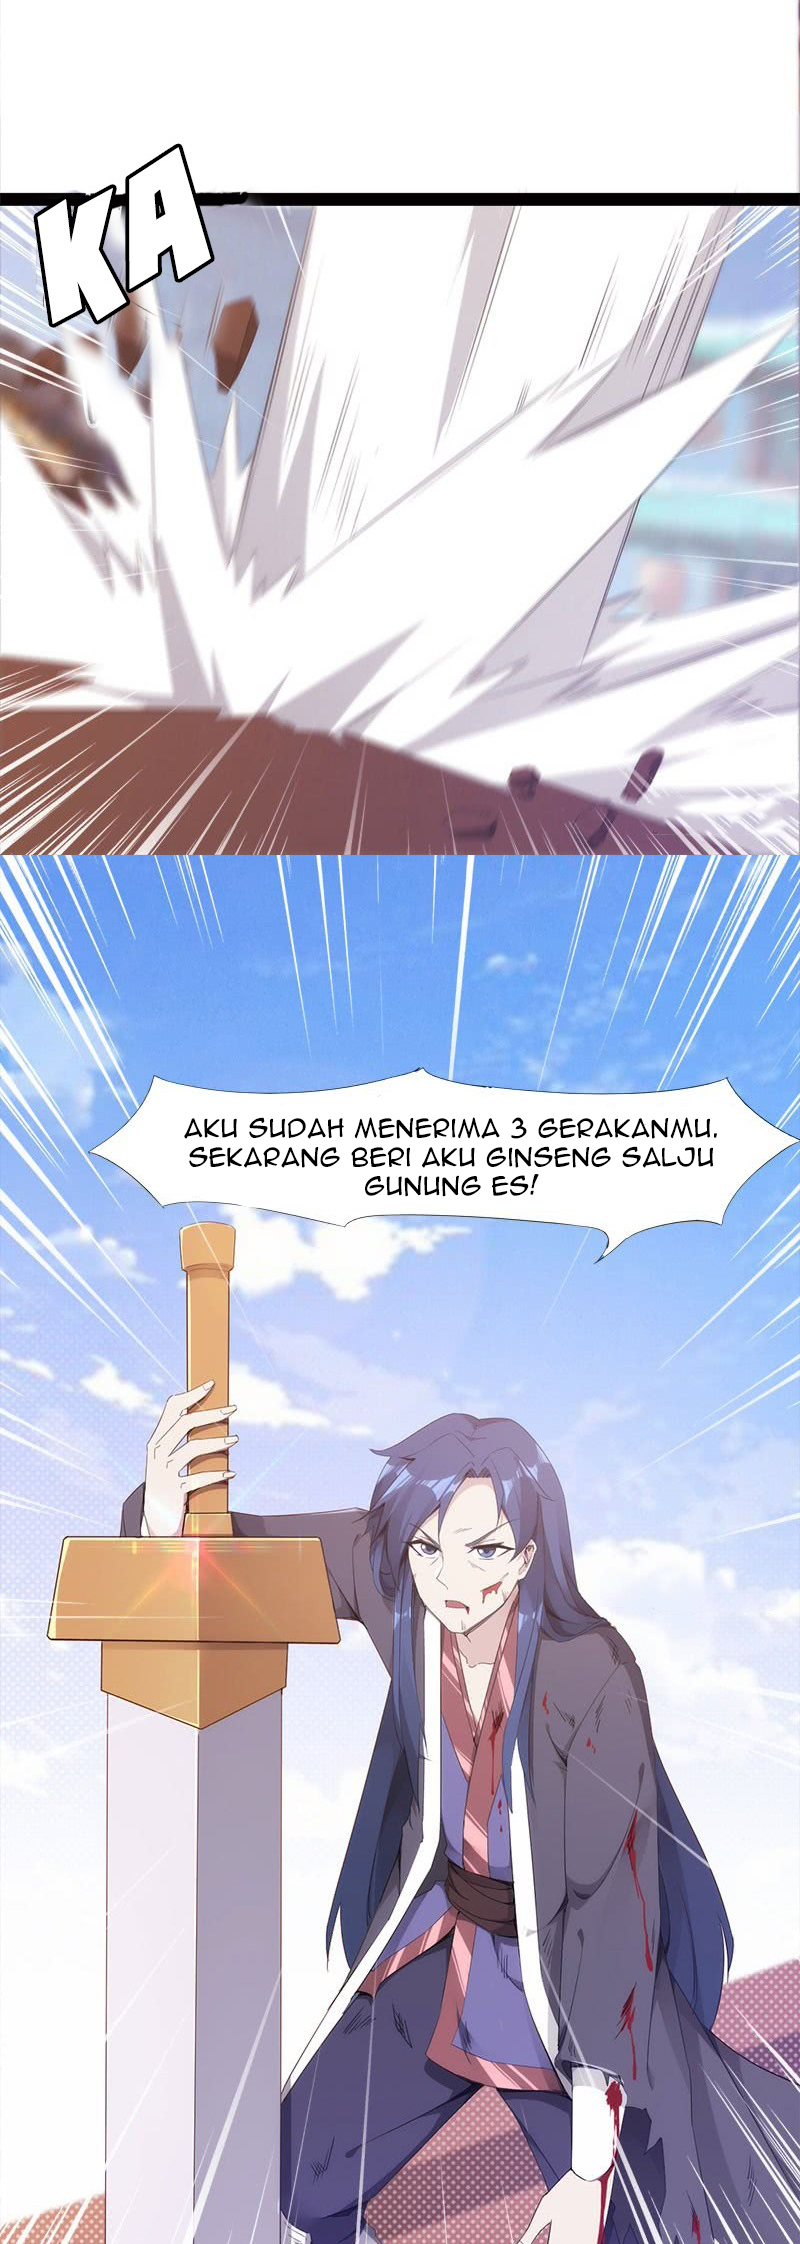 Path of the Sword Chapter 03